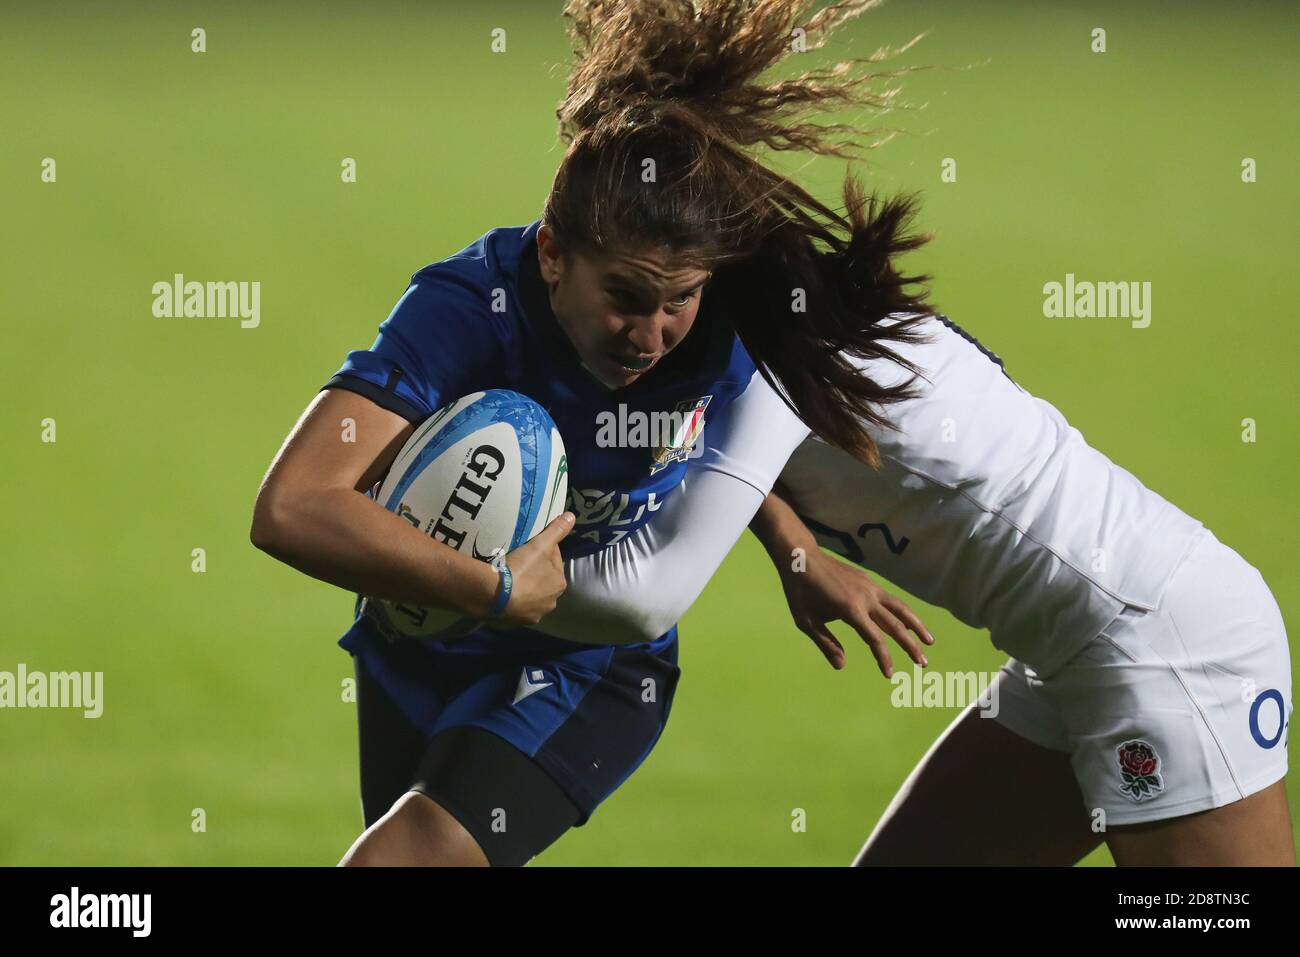 Sergio Lanfranchi stadium, parma, Italy, 01 Nov 2020, Italy wing Maria Magatti tries to keep the ball against Ellie Kildunne (England) during Women&#39;s Guinness Six Nations 2020 - Italy vs England, Rugby Six Nations match - Credit: LM/Massimiliano Carnabuci/Alamy Live News Stock Photo